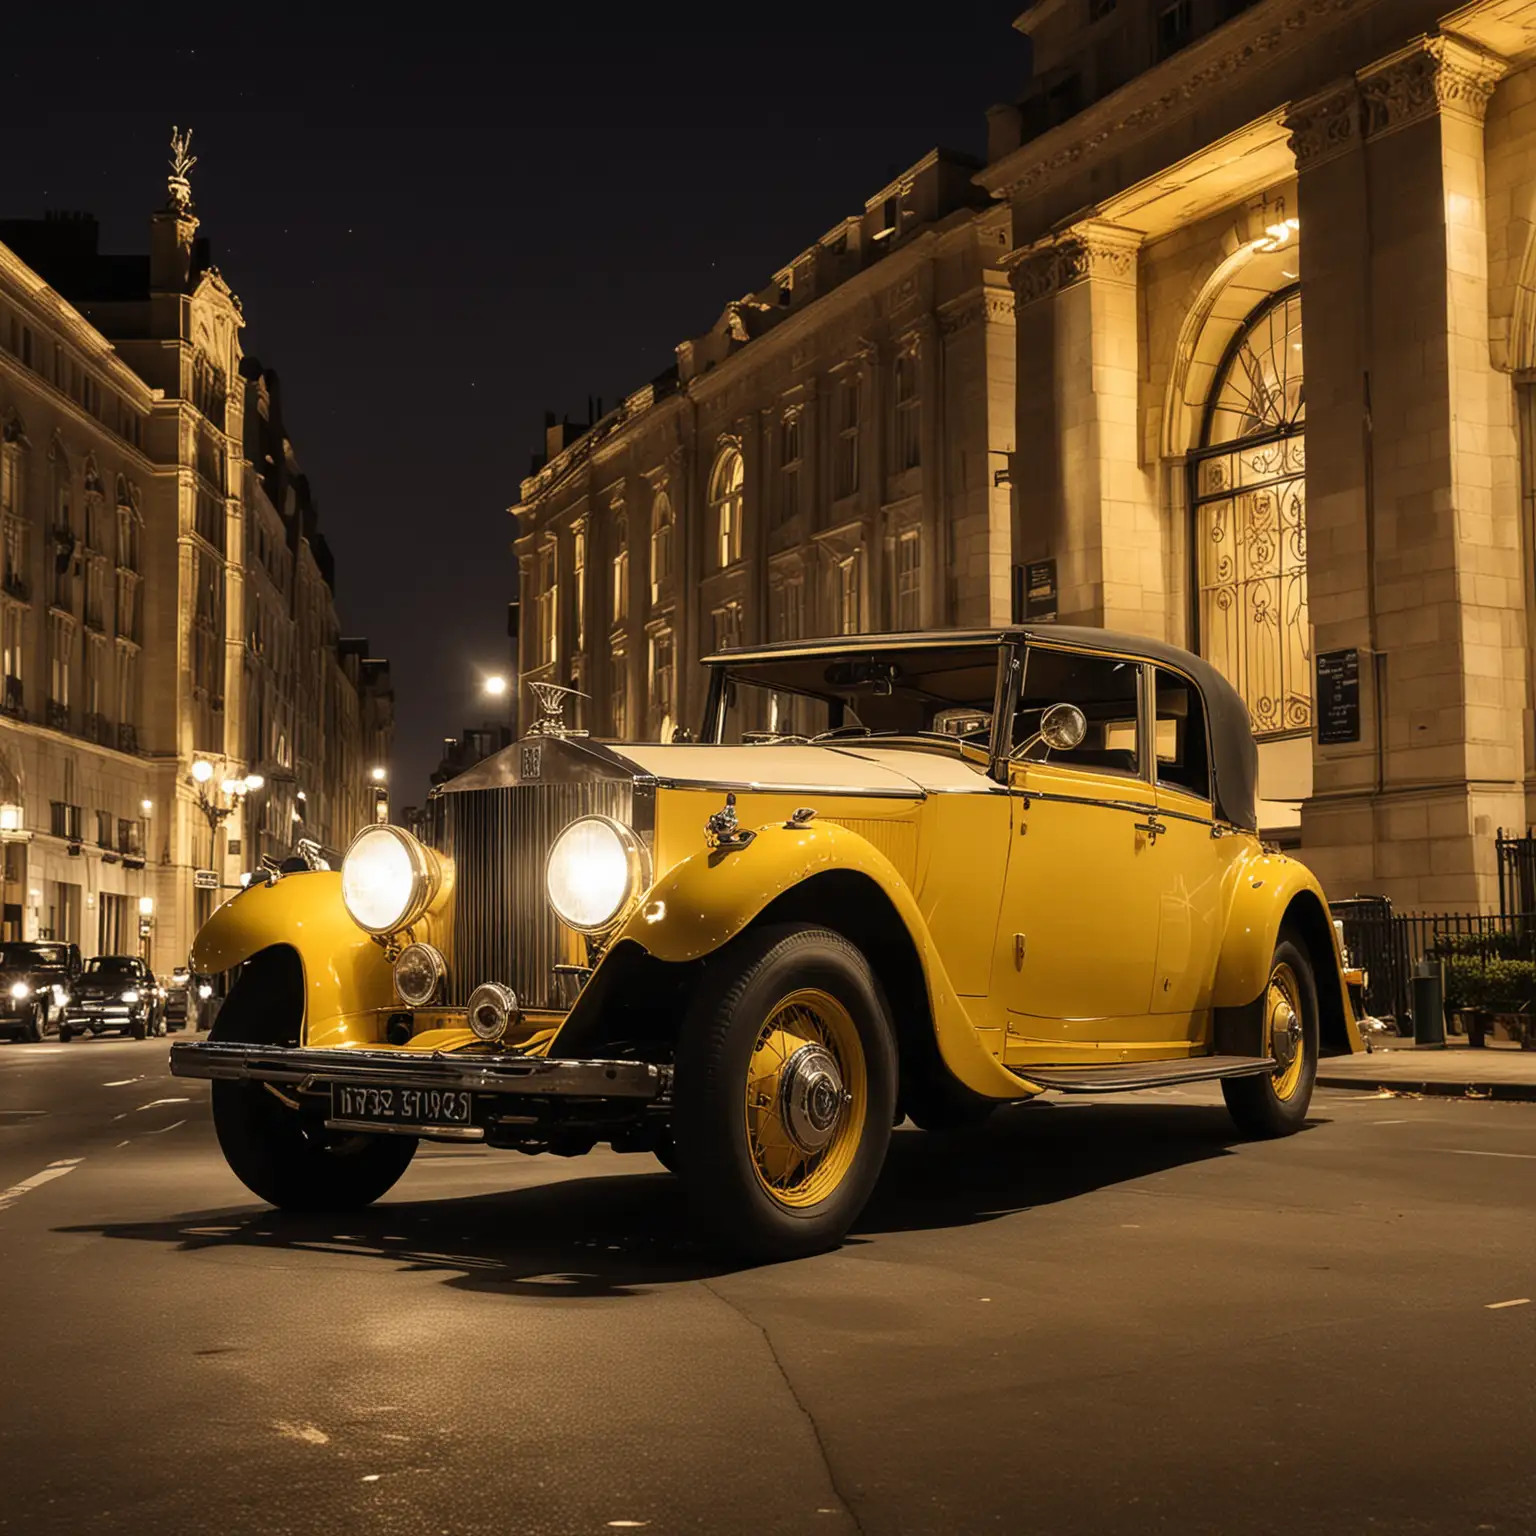 Vintage Yellow Rolls Royce Car with Art Deco Building at Night